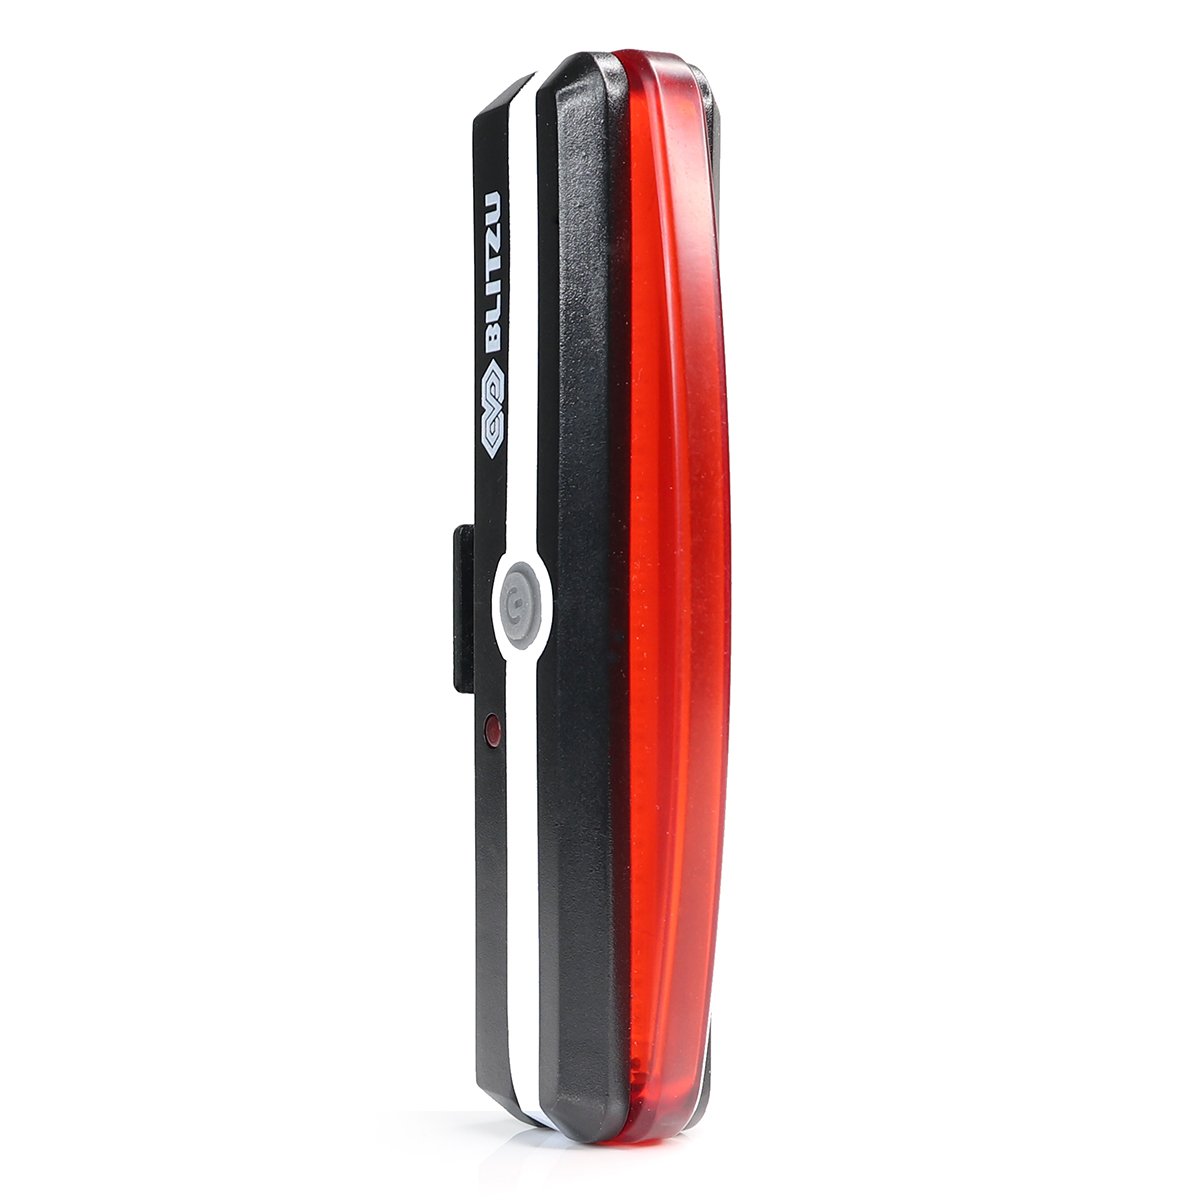 Ultra Bright Bike Light Blitzu Cyborg 168T USB Rechargeable Bicycle Tail  Light. Red High Intensity Rear LED Accessories Fits On Any Road Bikes,  Helmets. Easy To Install for Cycling Safety Flashlight –